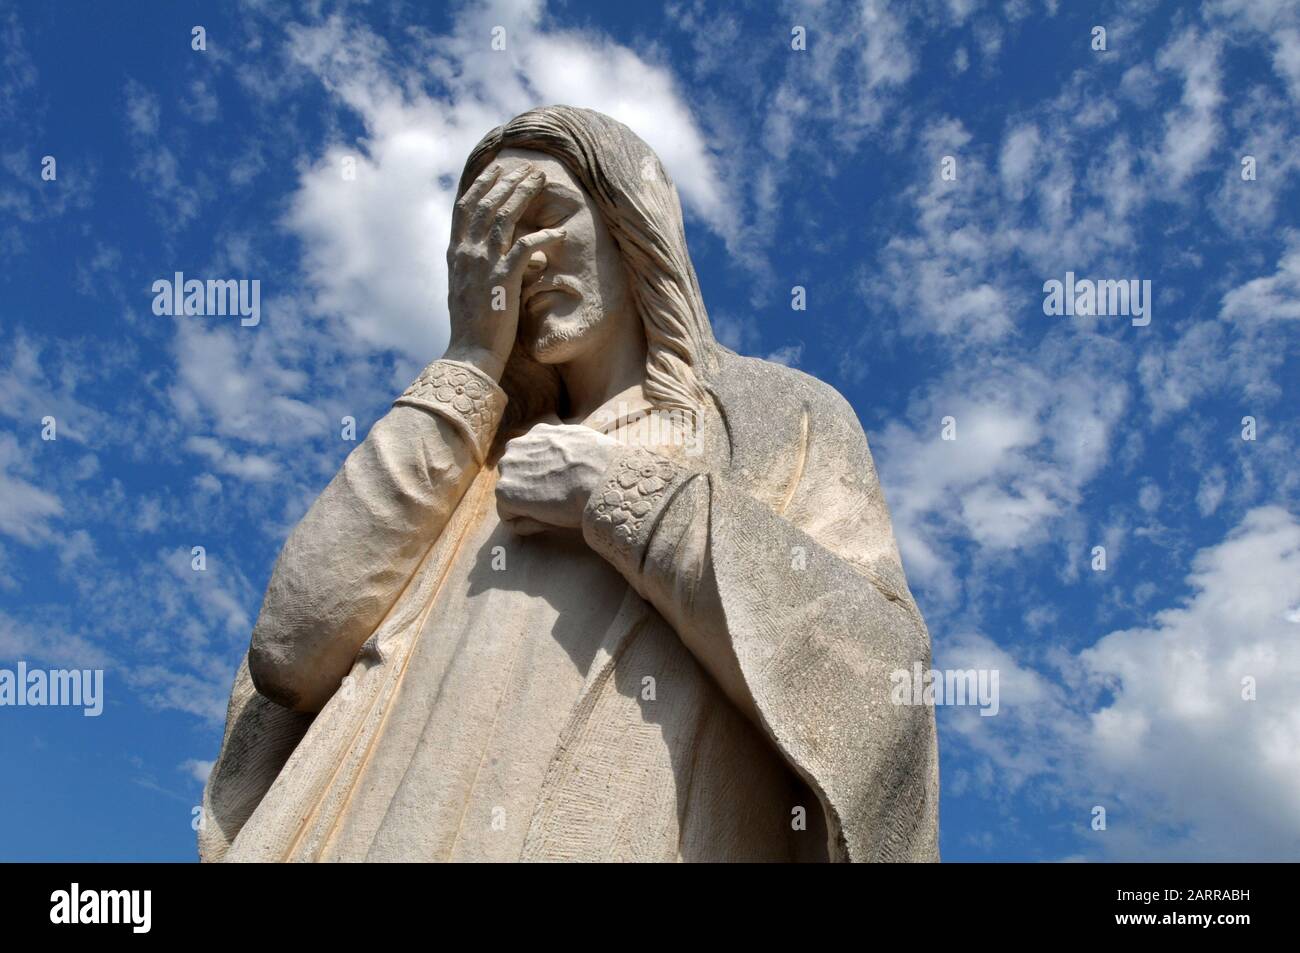 The statue 'And Jesus Wept', outside St. Joseph Old Cathedral and across from the site of the 1995 Oklahoma City bombing, pays tribute to those lost. Stock Photo